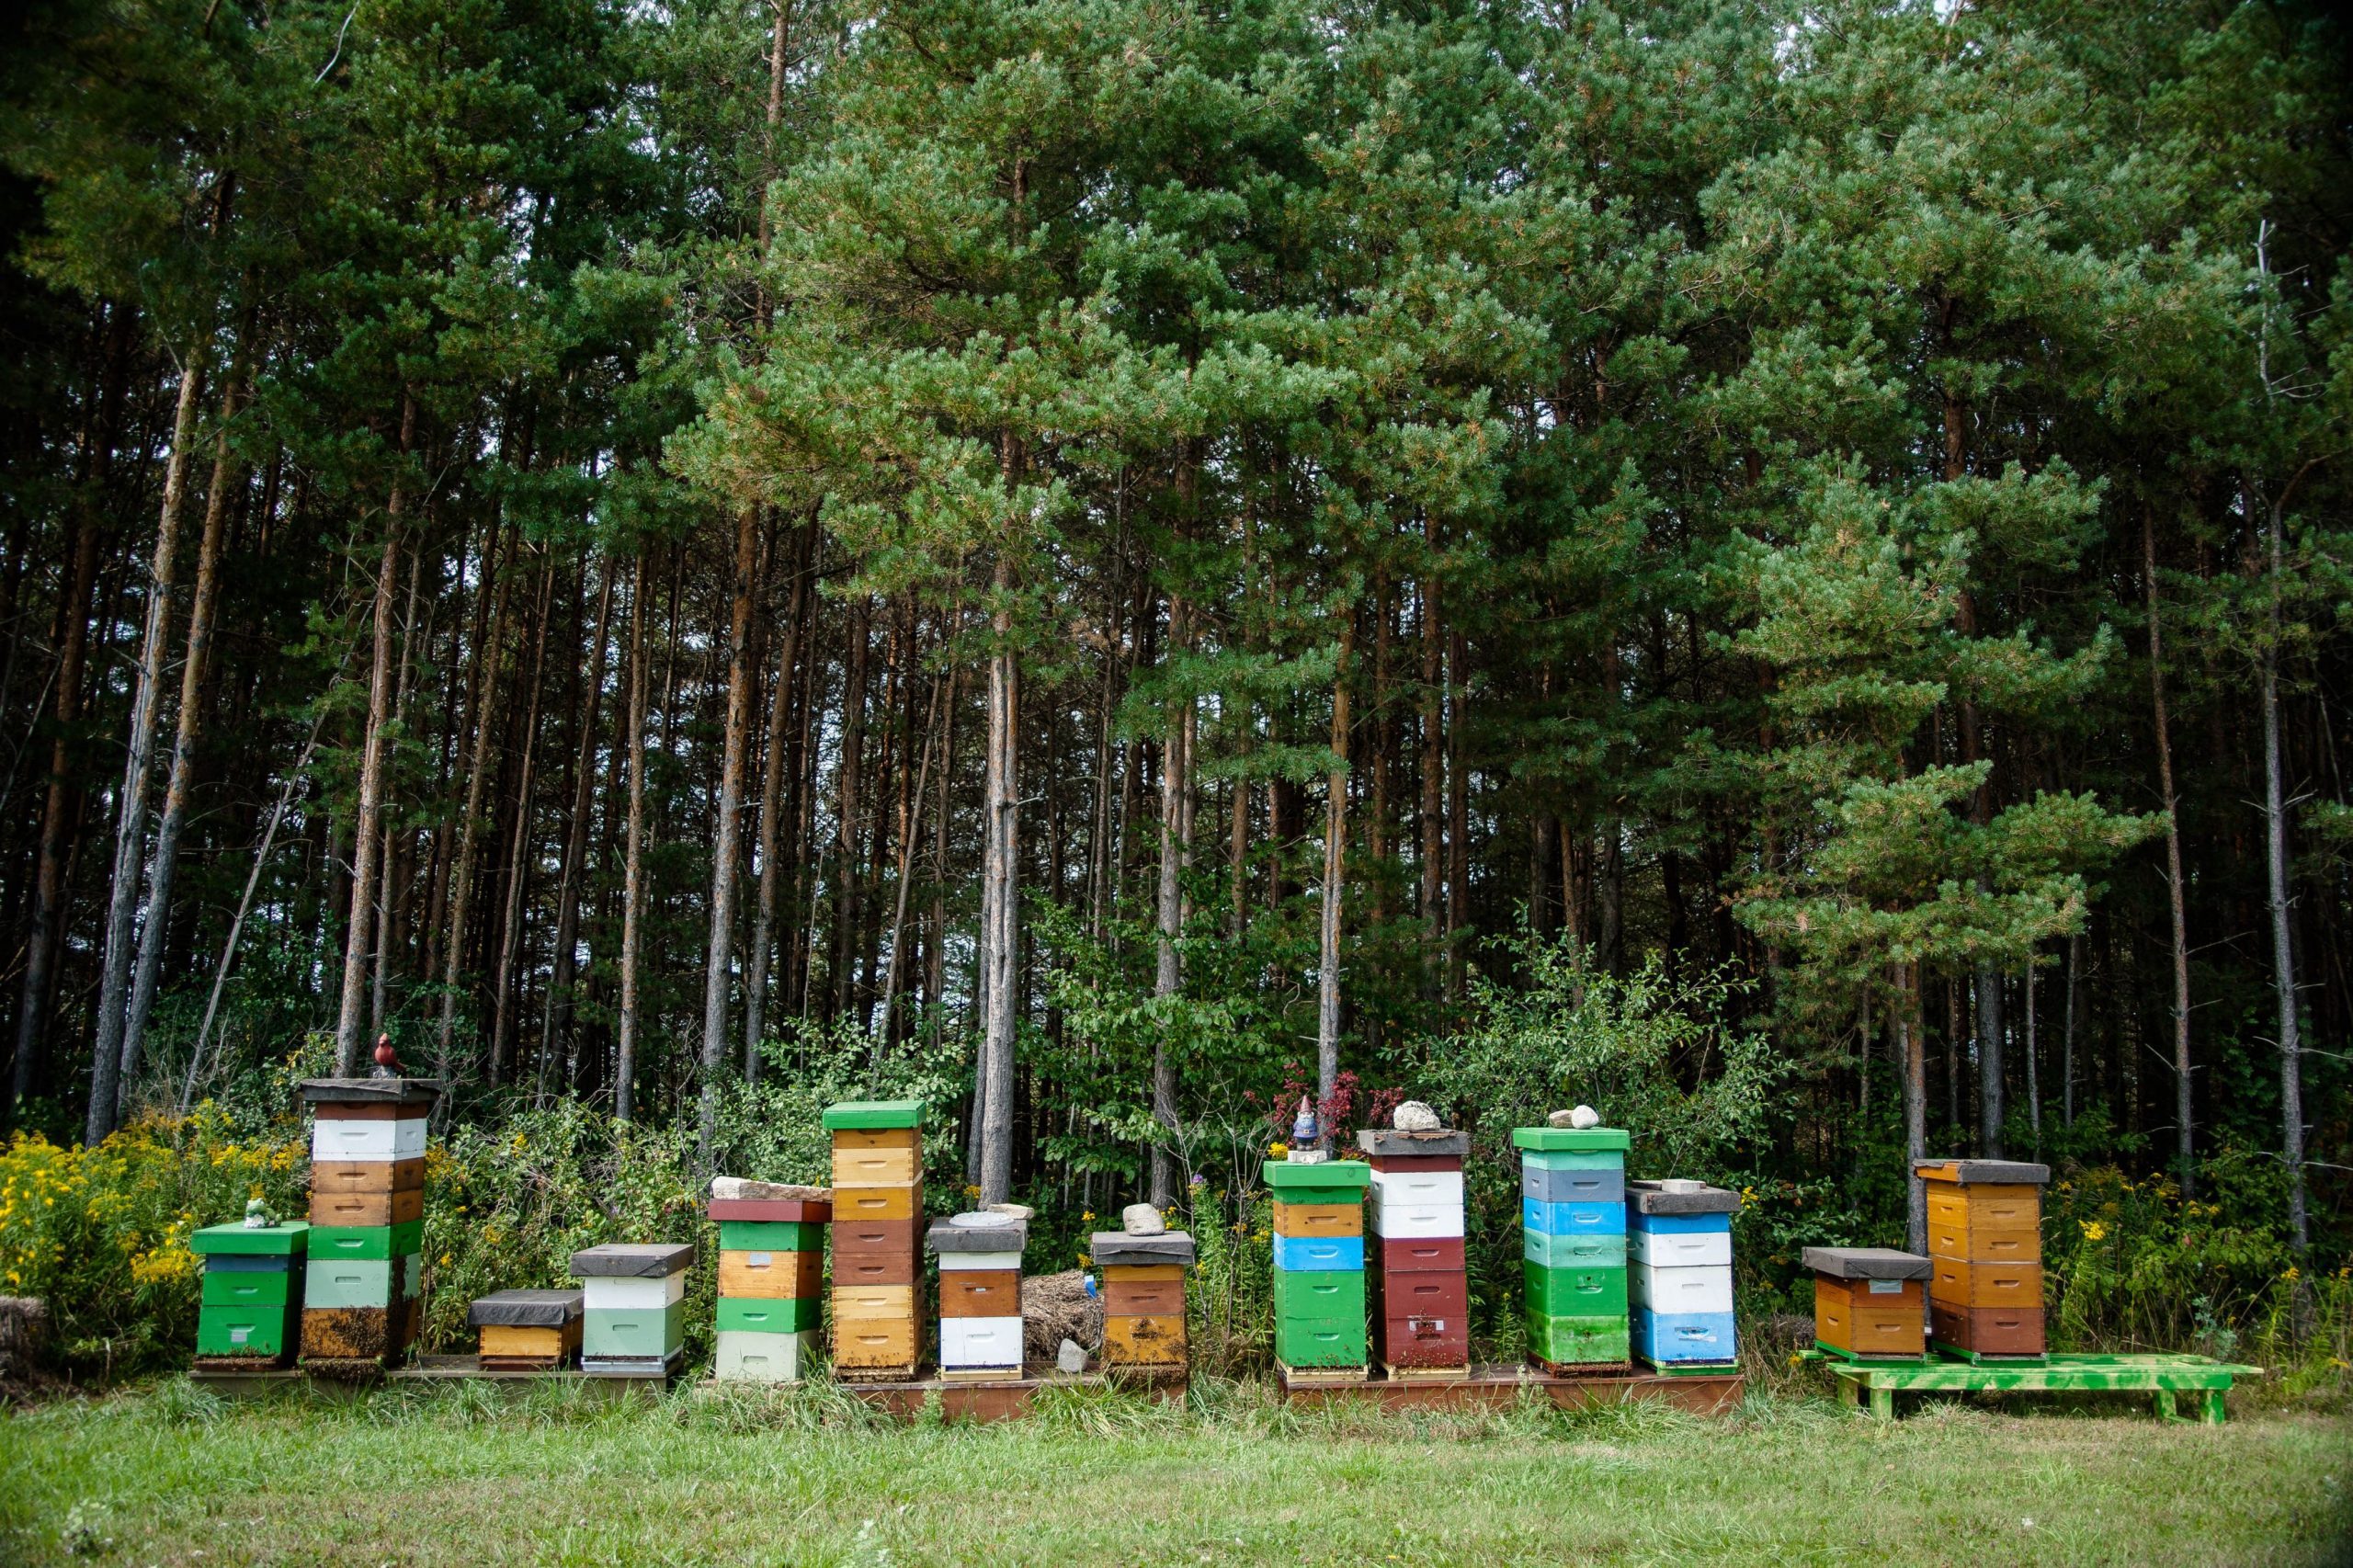 A row of beehives against a wooded backdrop